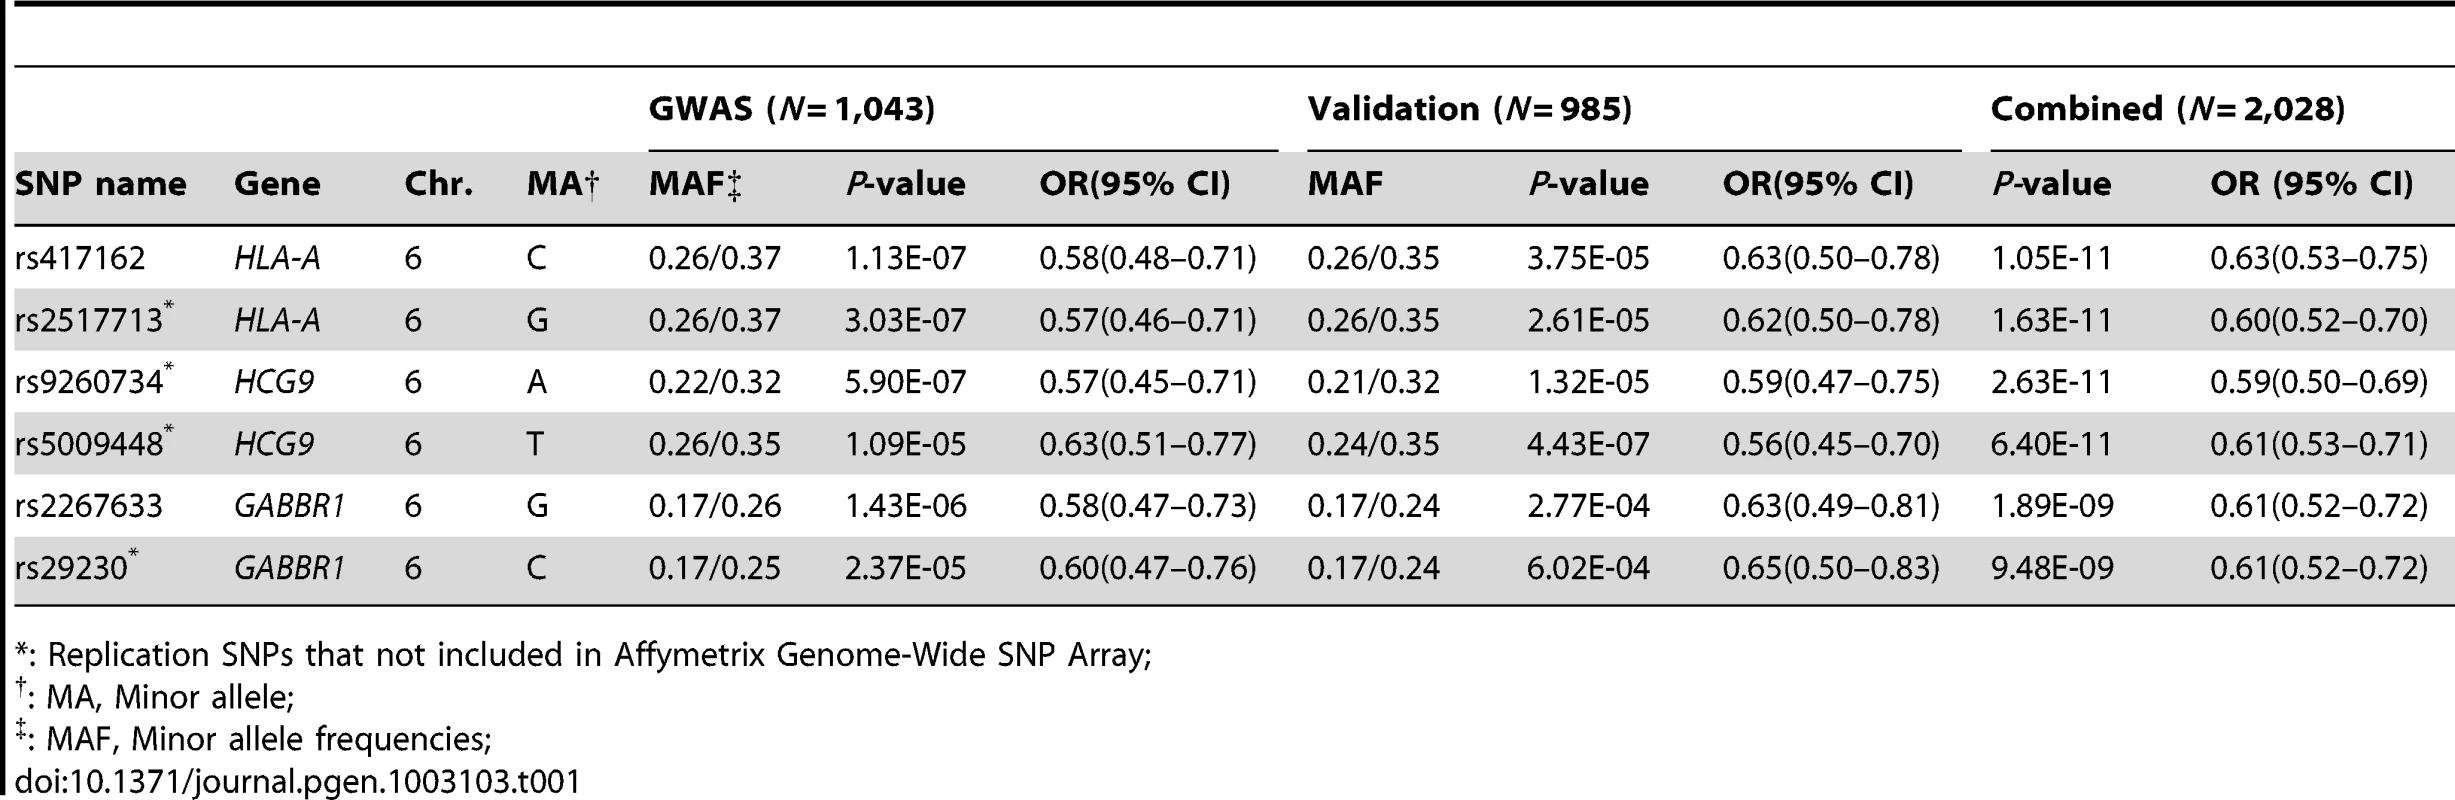 GWAS and validation of SNPs association data in two independent NPC cohorts.